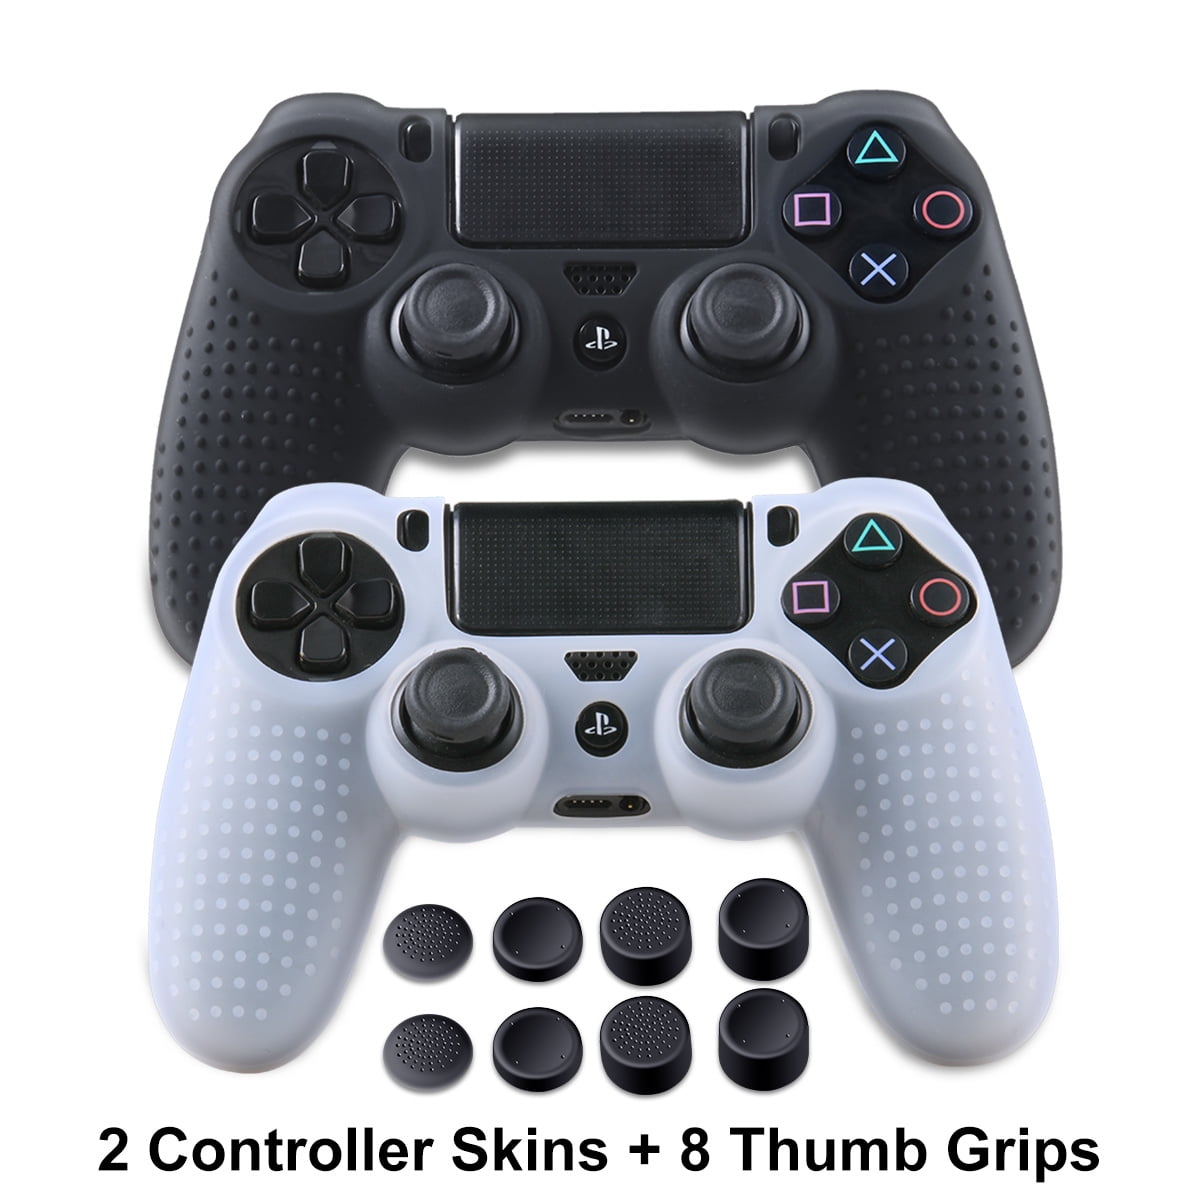 PS4/PS4 SLIM/PS4 PRO Controller Silicone Skins - DualShock 4 Covers  Anti-slip Thumb Grip Protector Skin Case Set for Sony PS4, PS4 Slim, PS4  Pro - 2